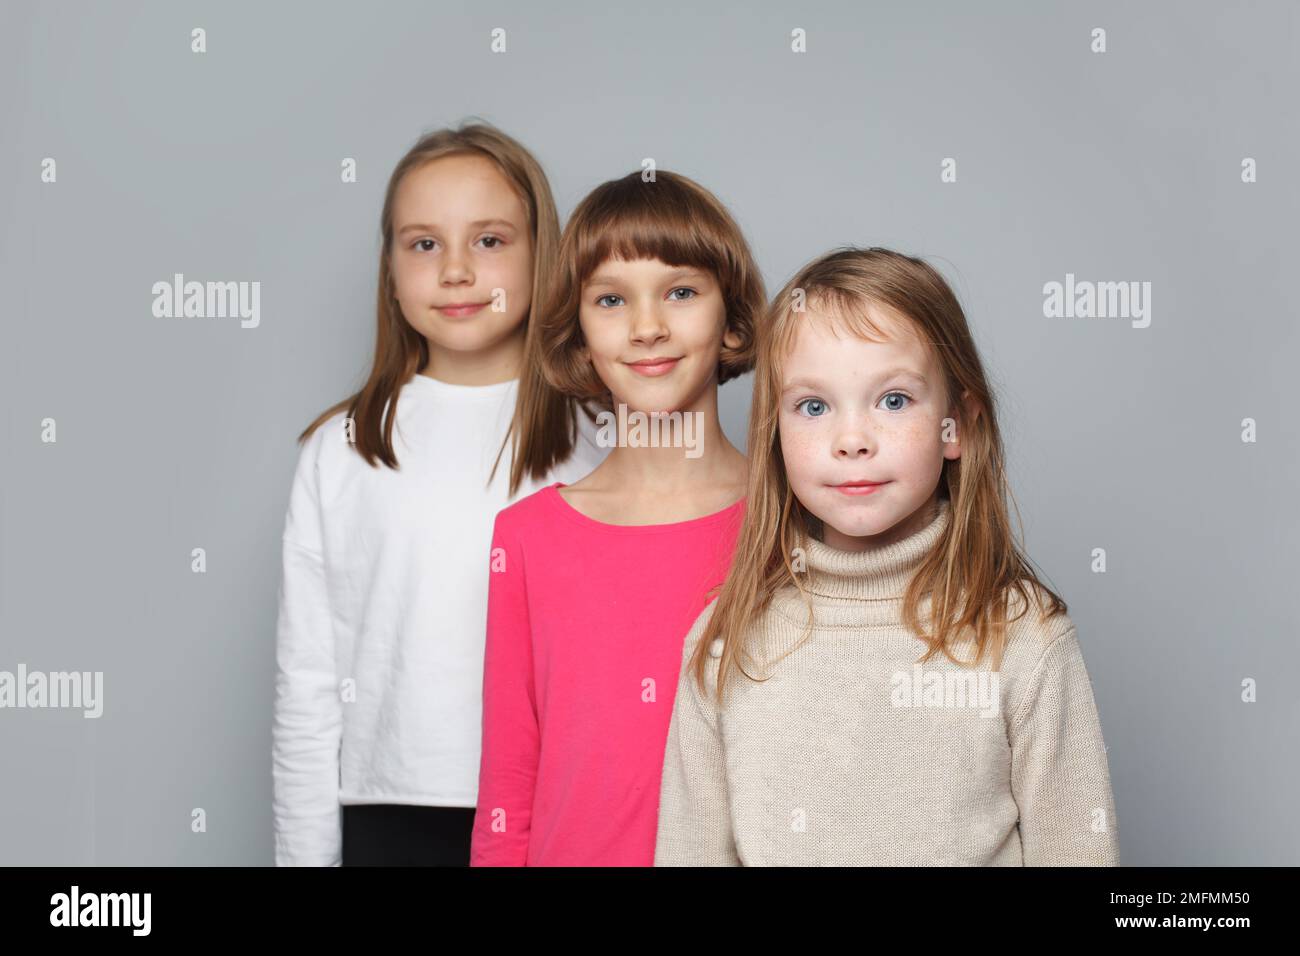 Kids 7, 8 and 9 years old. Young girls on gray background Stock Photo